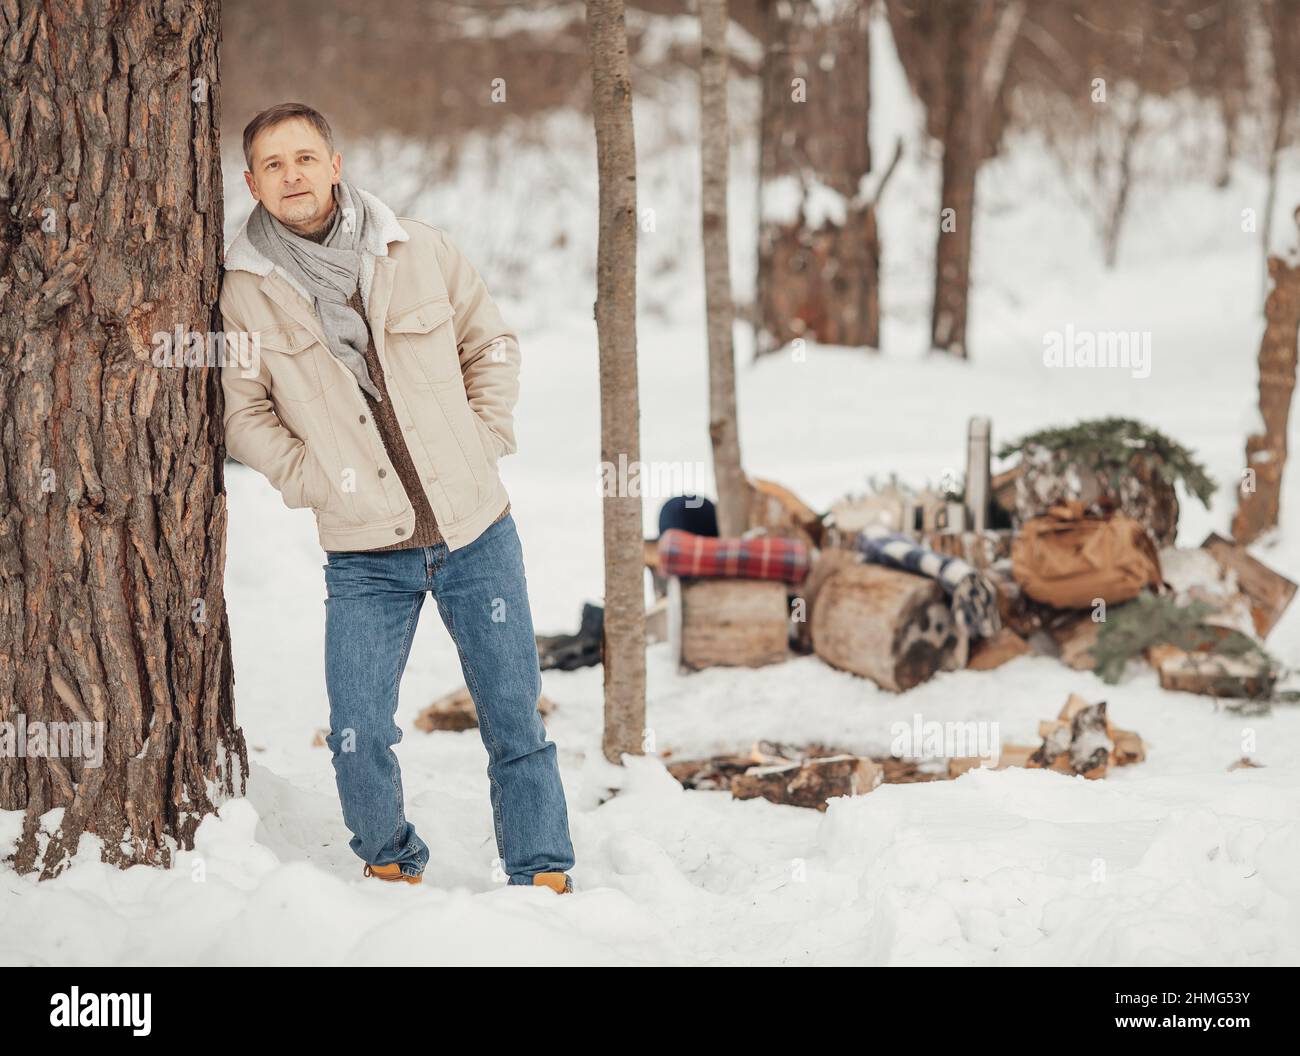 A brutal man in the winter forest by the fire drinking coffee Stock Photo